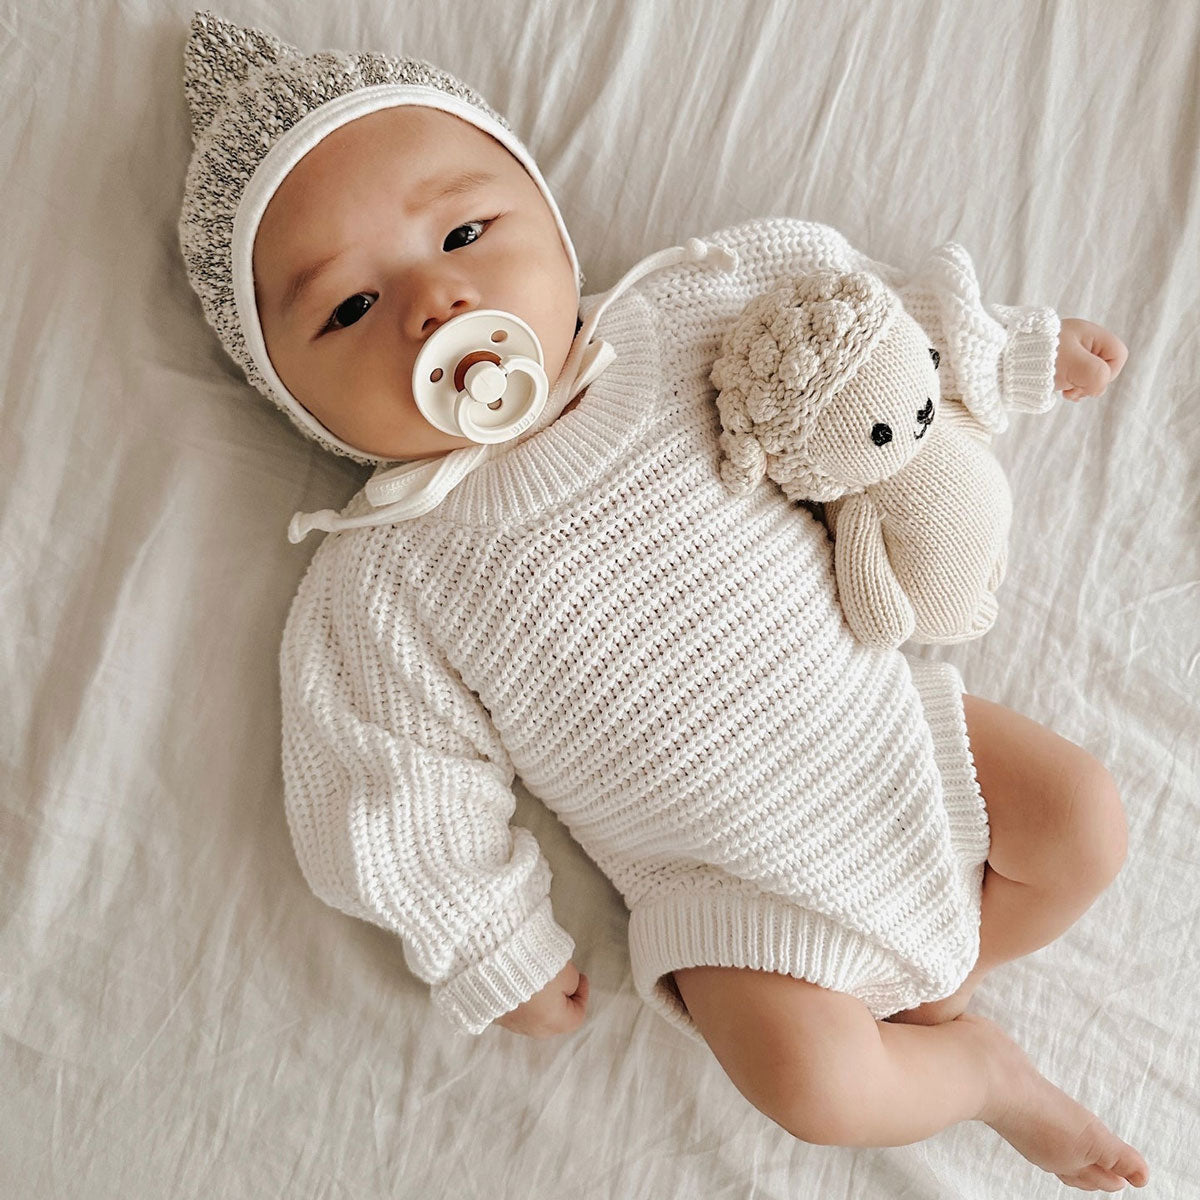 Baby wearing Oat and Co Chunky Knit Onesie - Dove